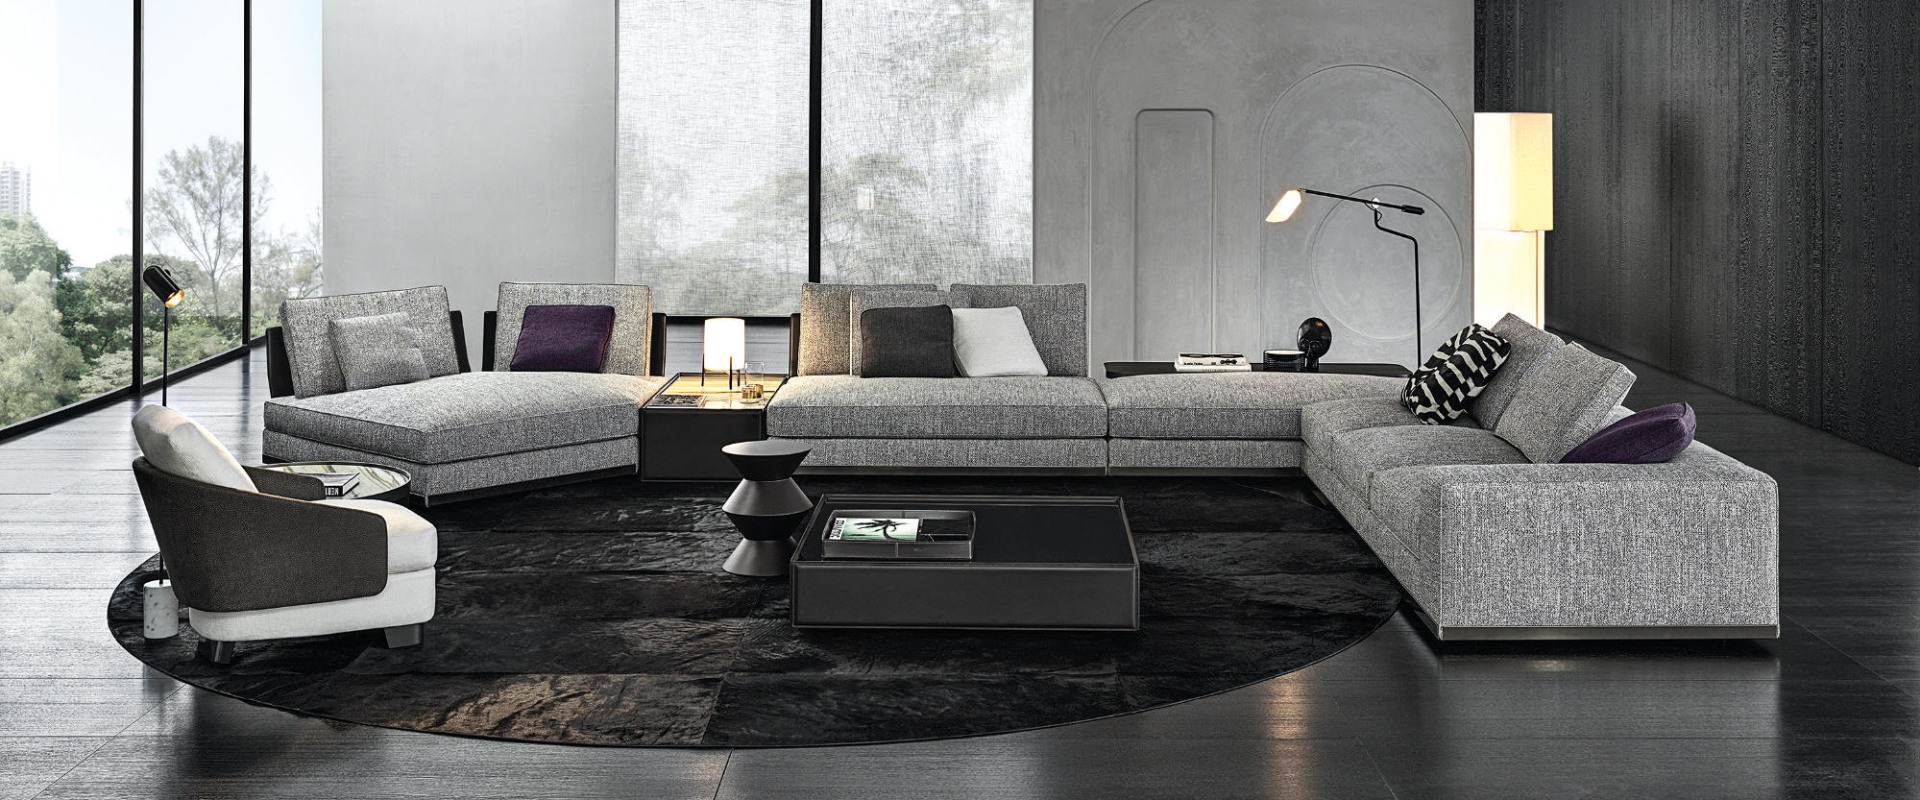 How has Minotti transformed its design philosophy over the years